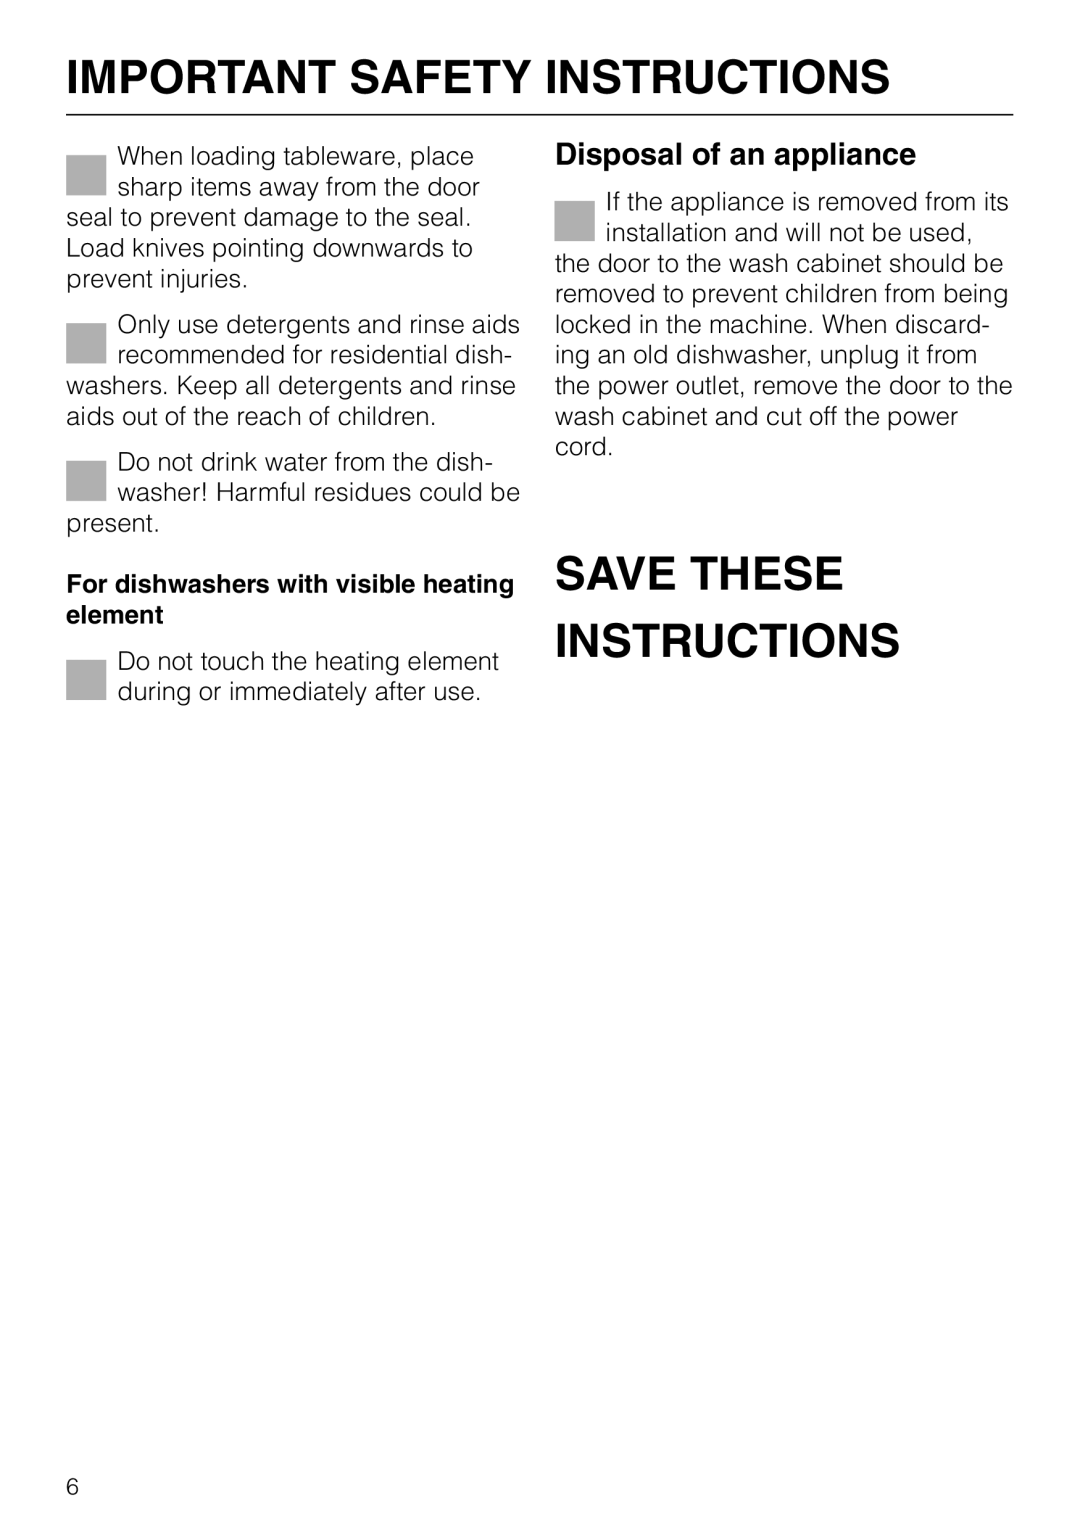 Miele G 842 PLUS, G 842 SC PLUS manual Save These Instructions, Disposal of an appliance, Important Safety Instructions 